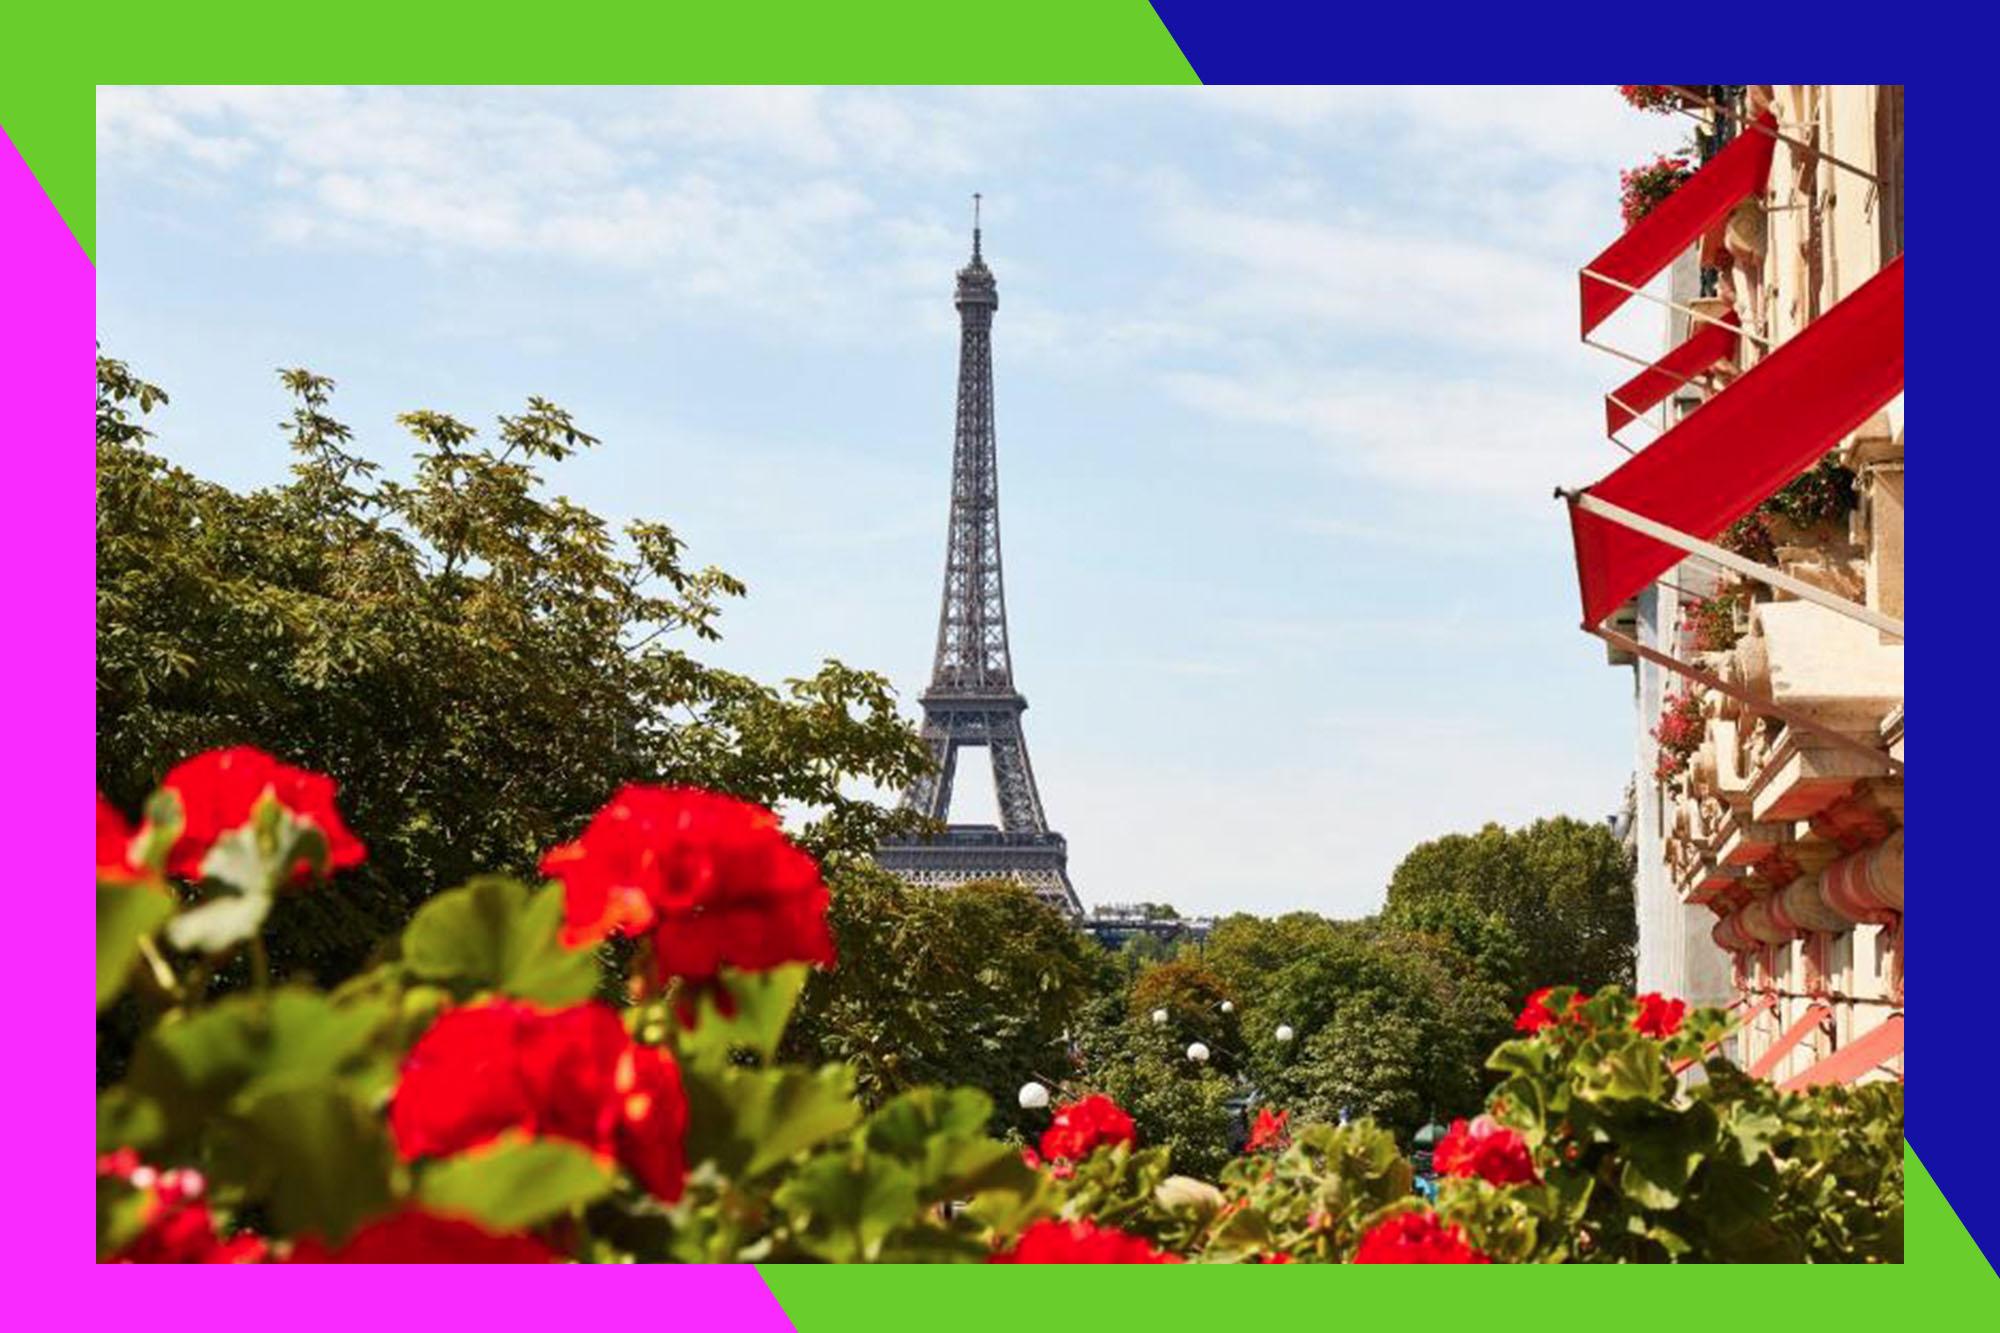 A tower in Paris surrounded by red flowers and trees